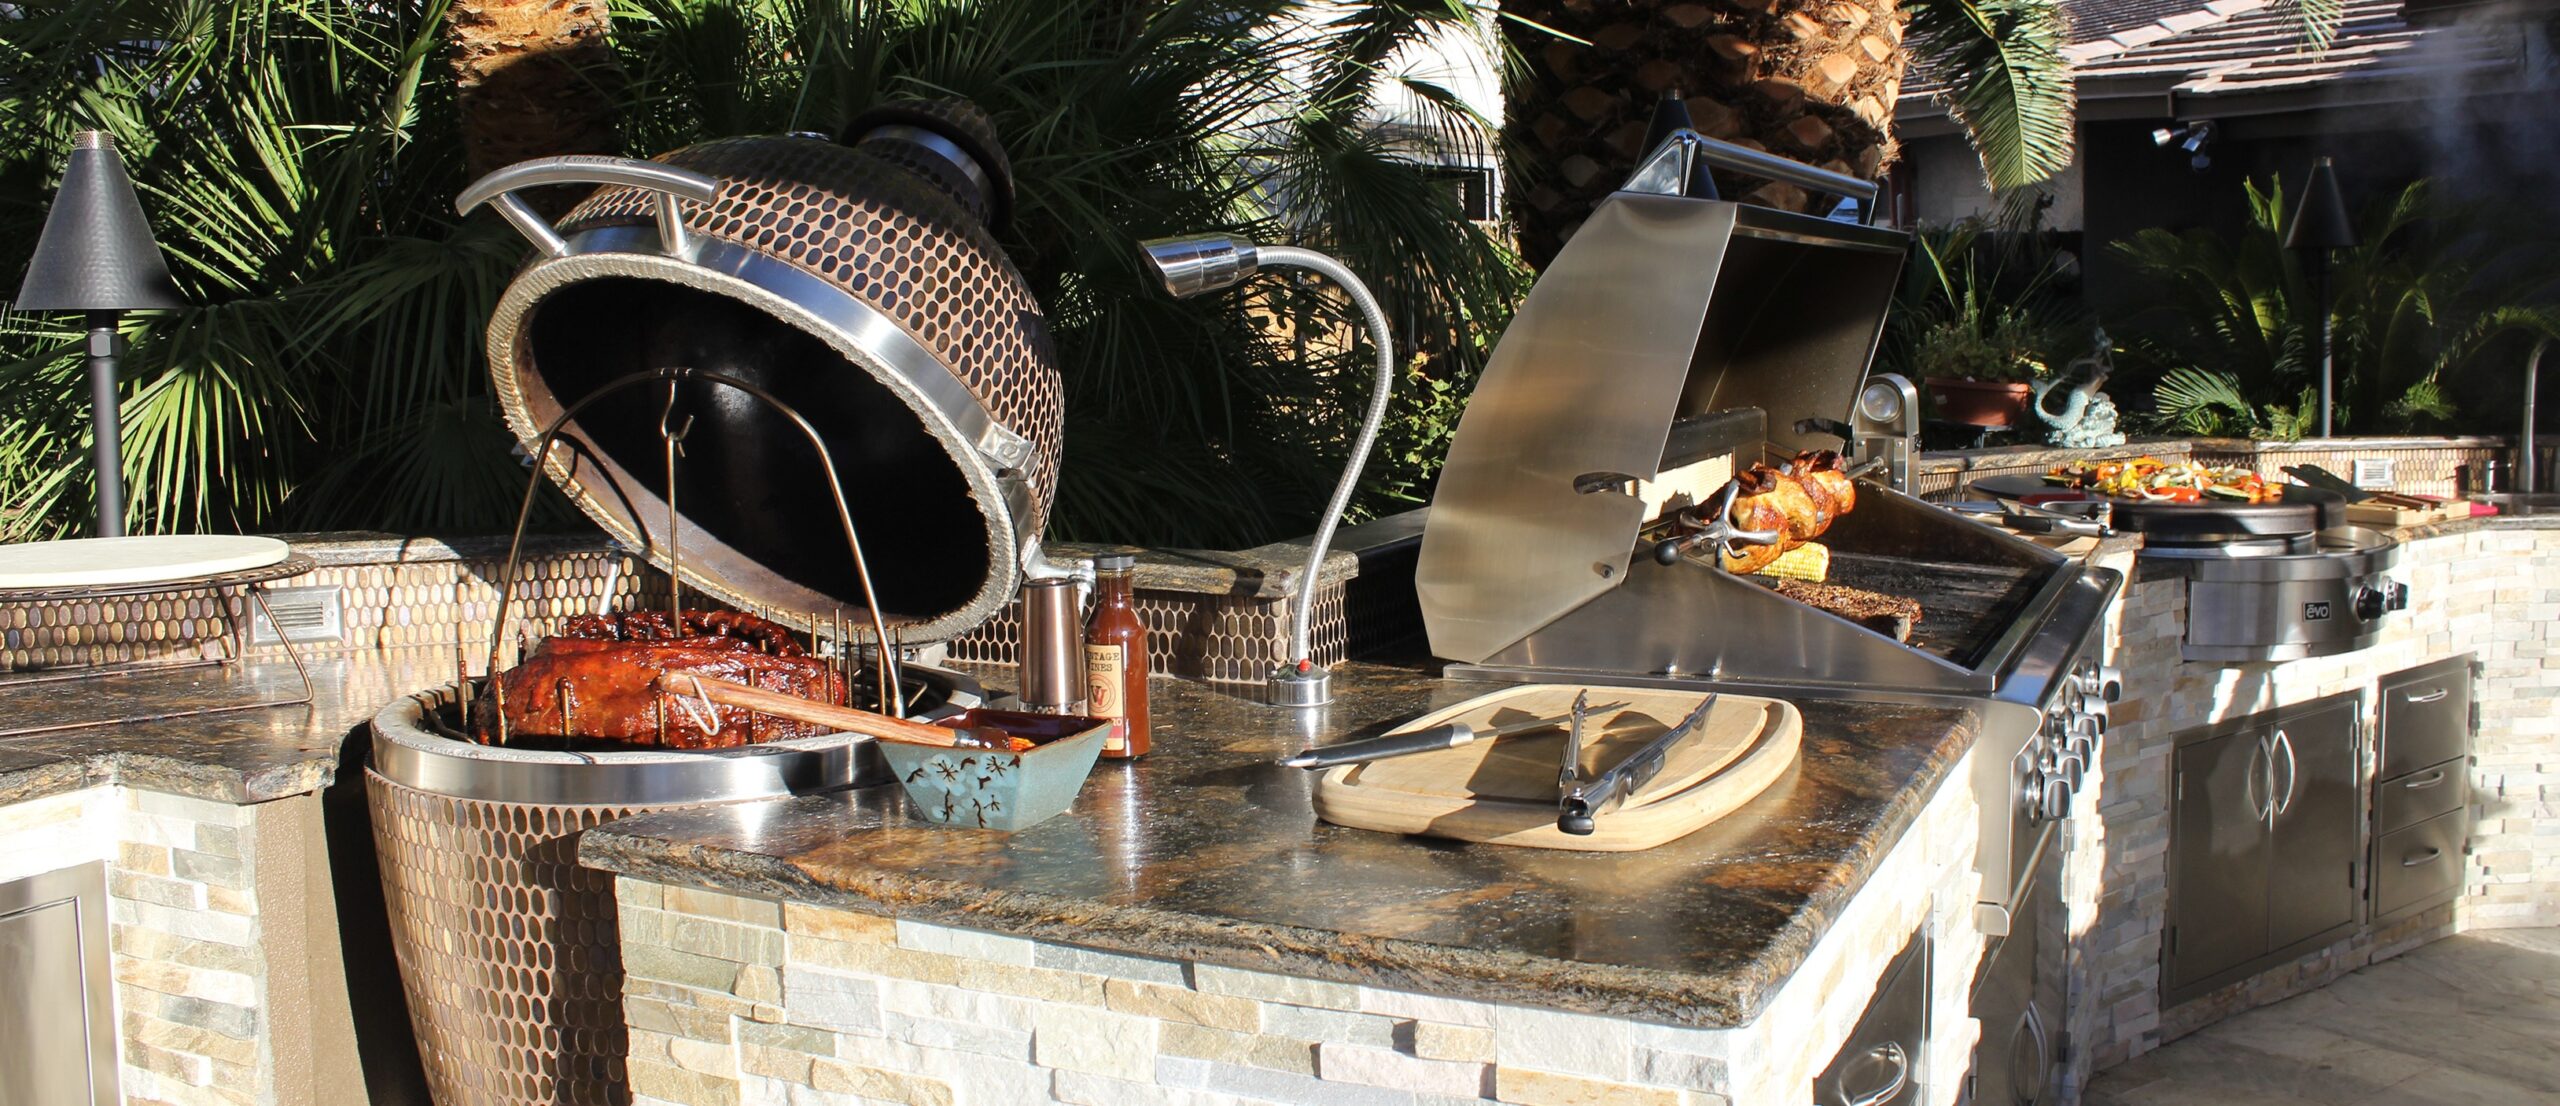 How to Add a Kamado Grill to Your Outdoor Kitchen